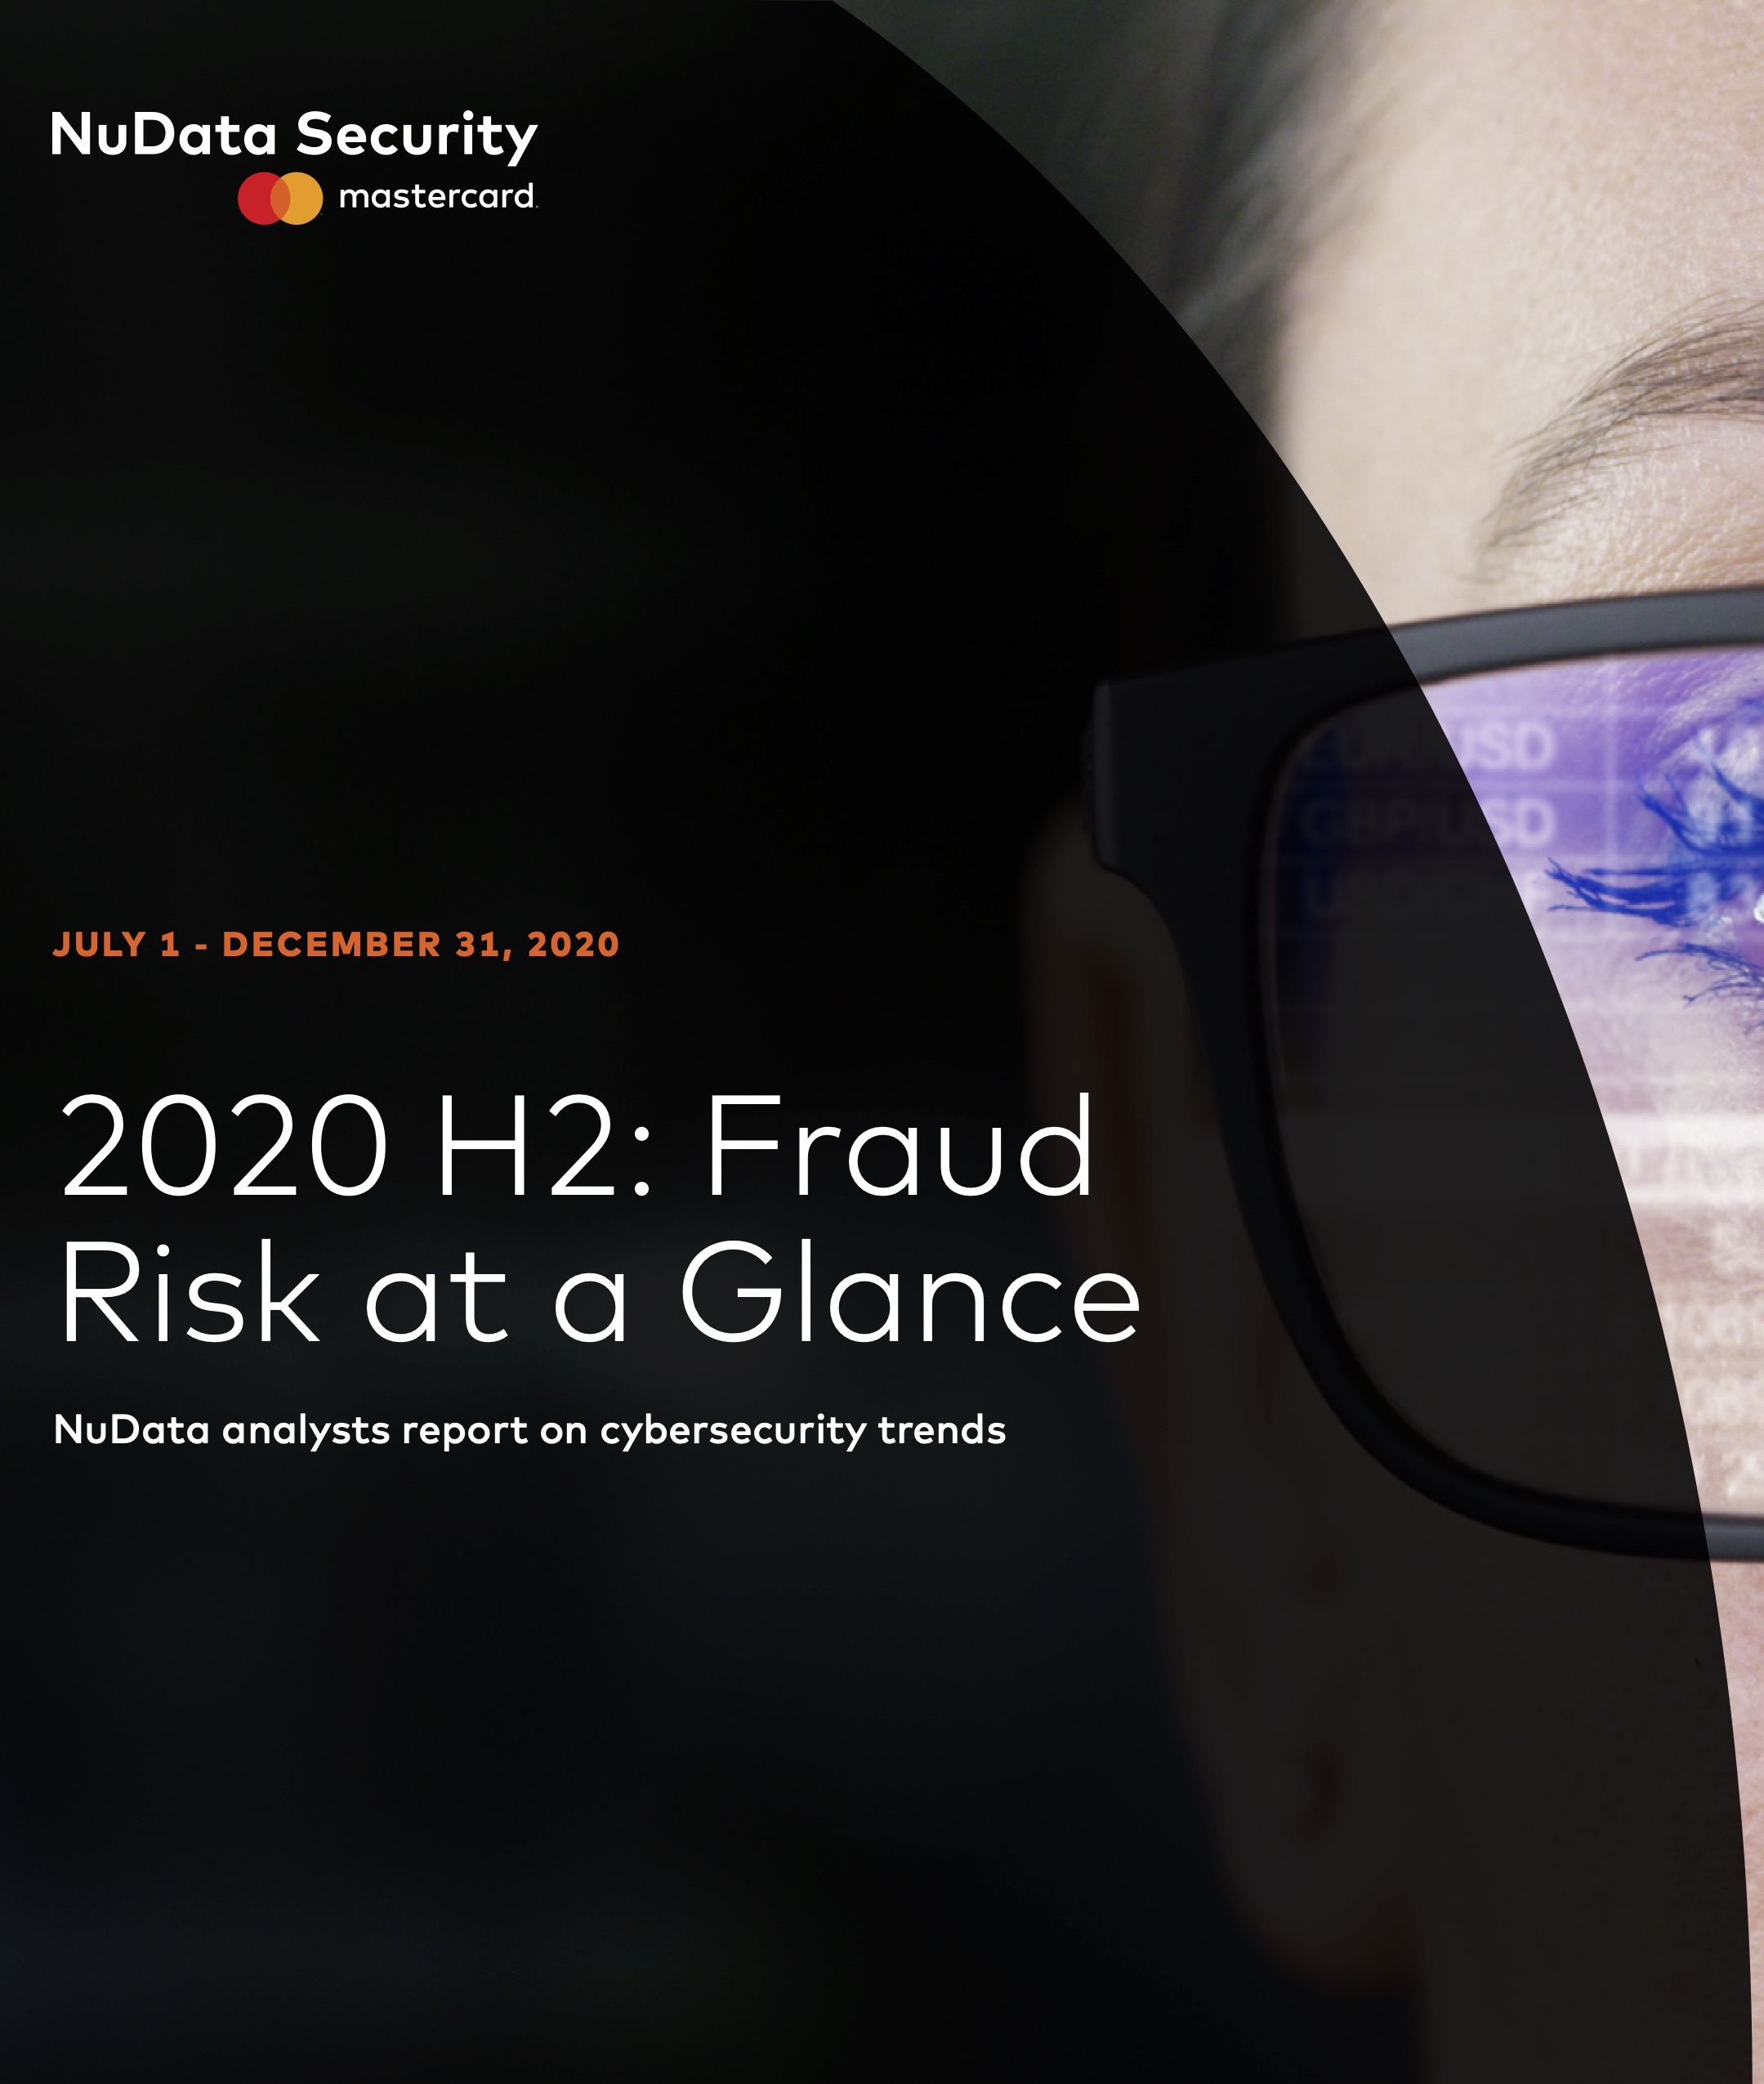 2020 H2: Fraud risk at a glance